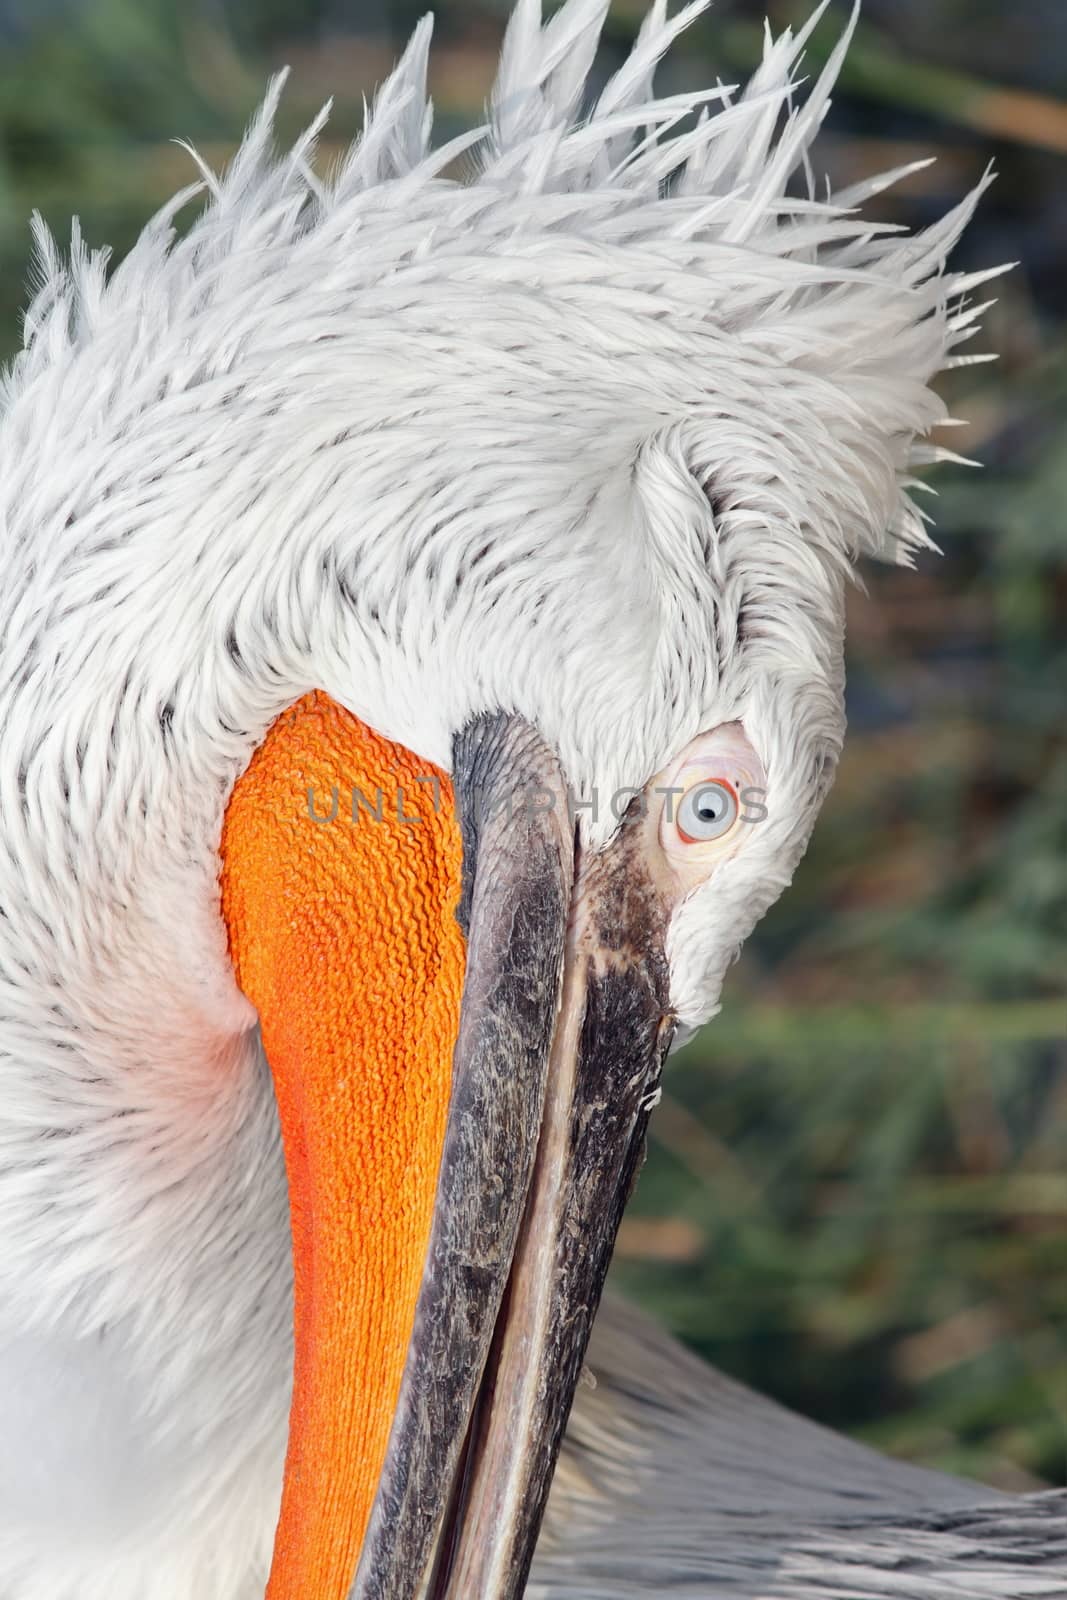 details on dalmatian pelican head by taviphoto